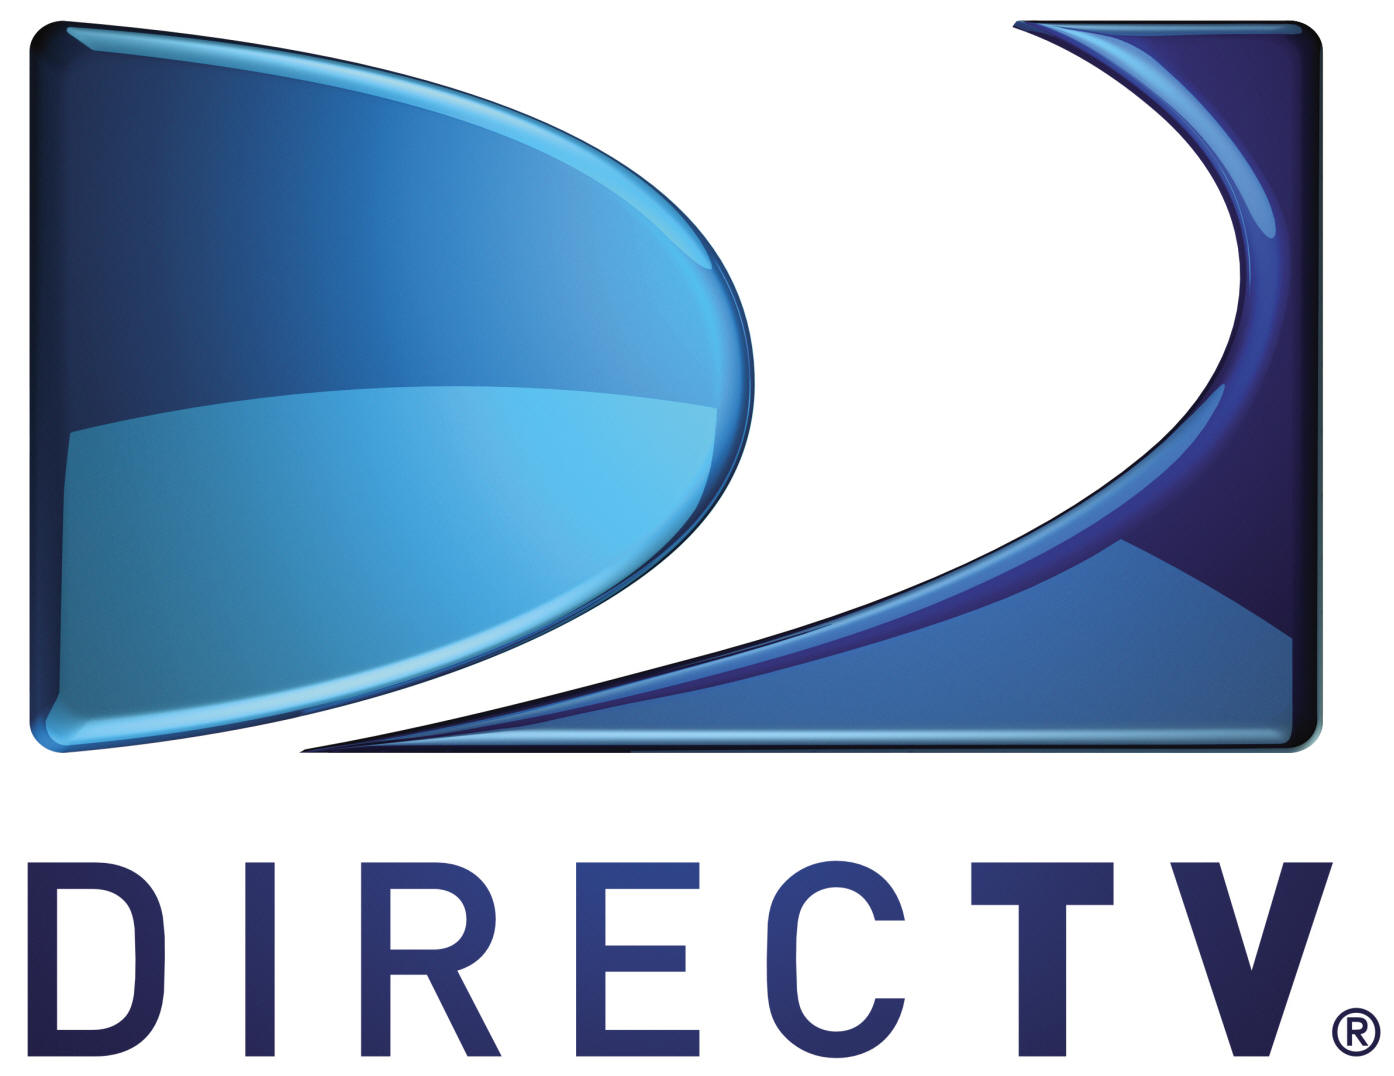 DirecTV - Not So Direct About Their Offers